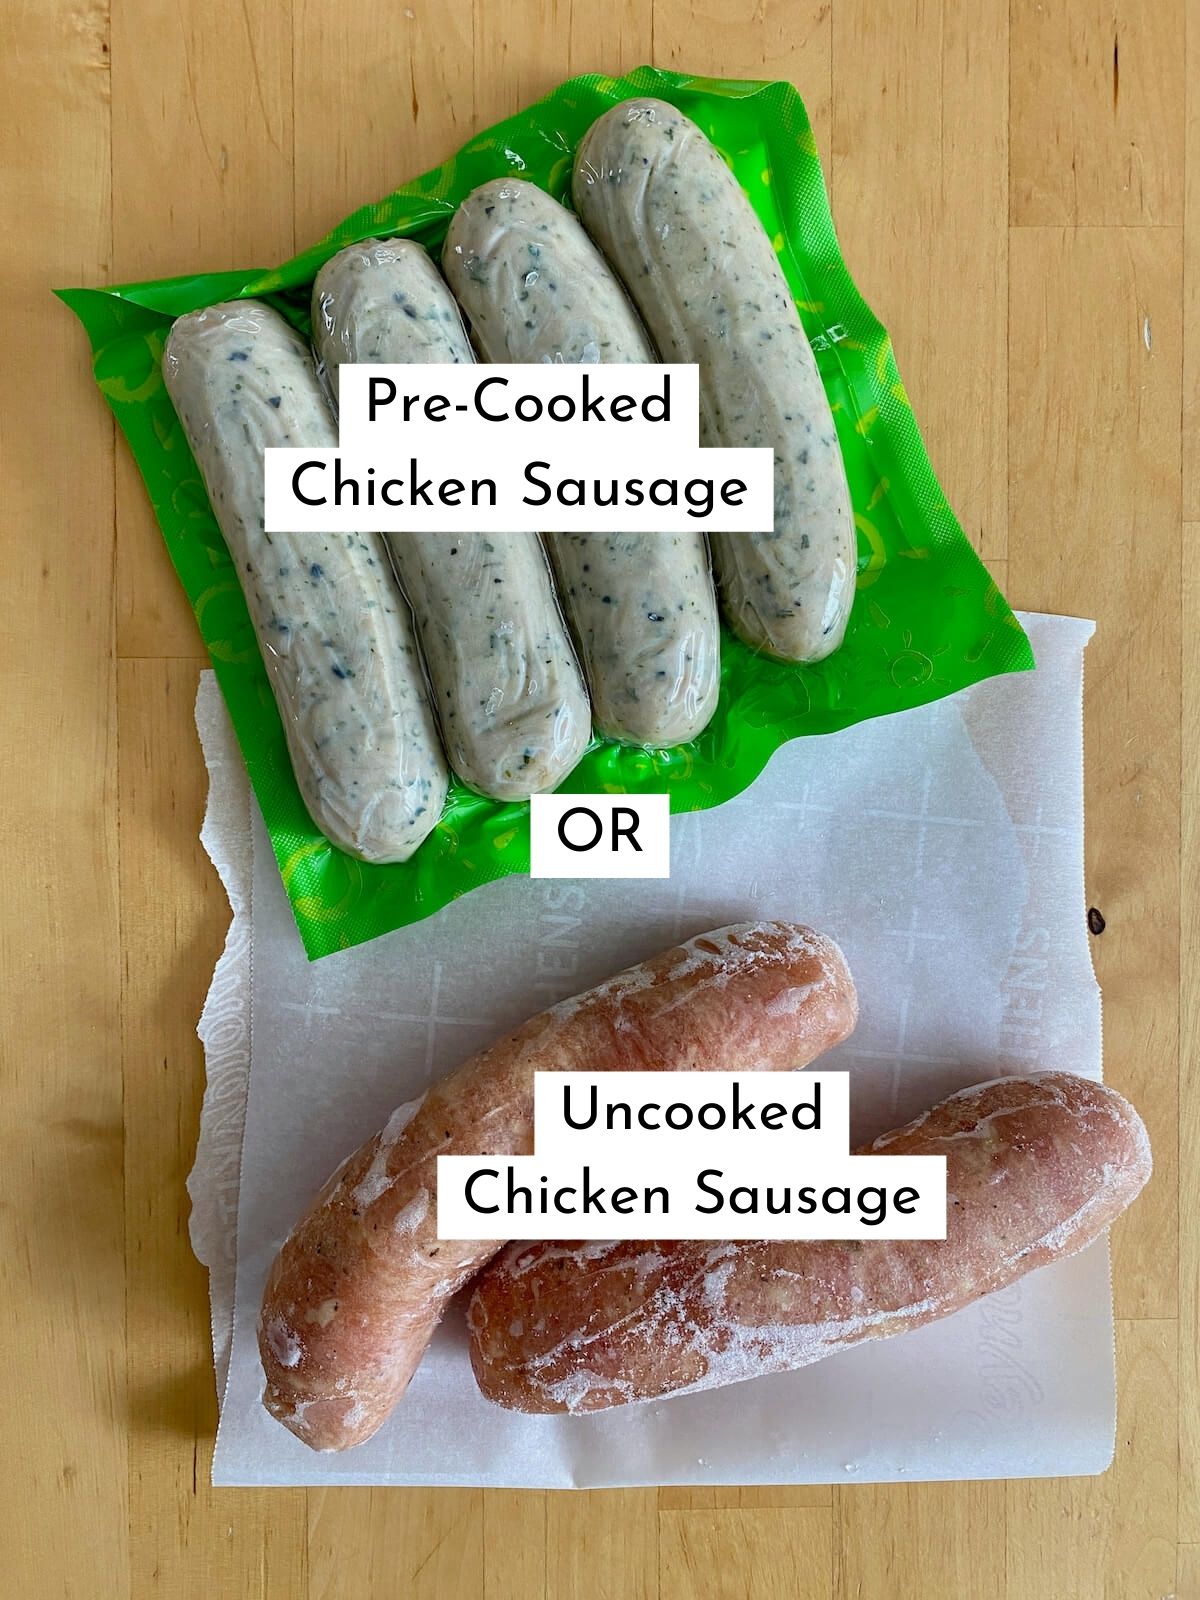 The ingredients to make air fryer chicken sausages. They are labeled with text that reads "pre-cooked chicken sausages or uncooked chicken sausages."